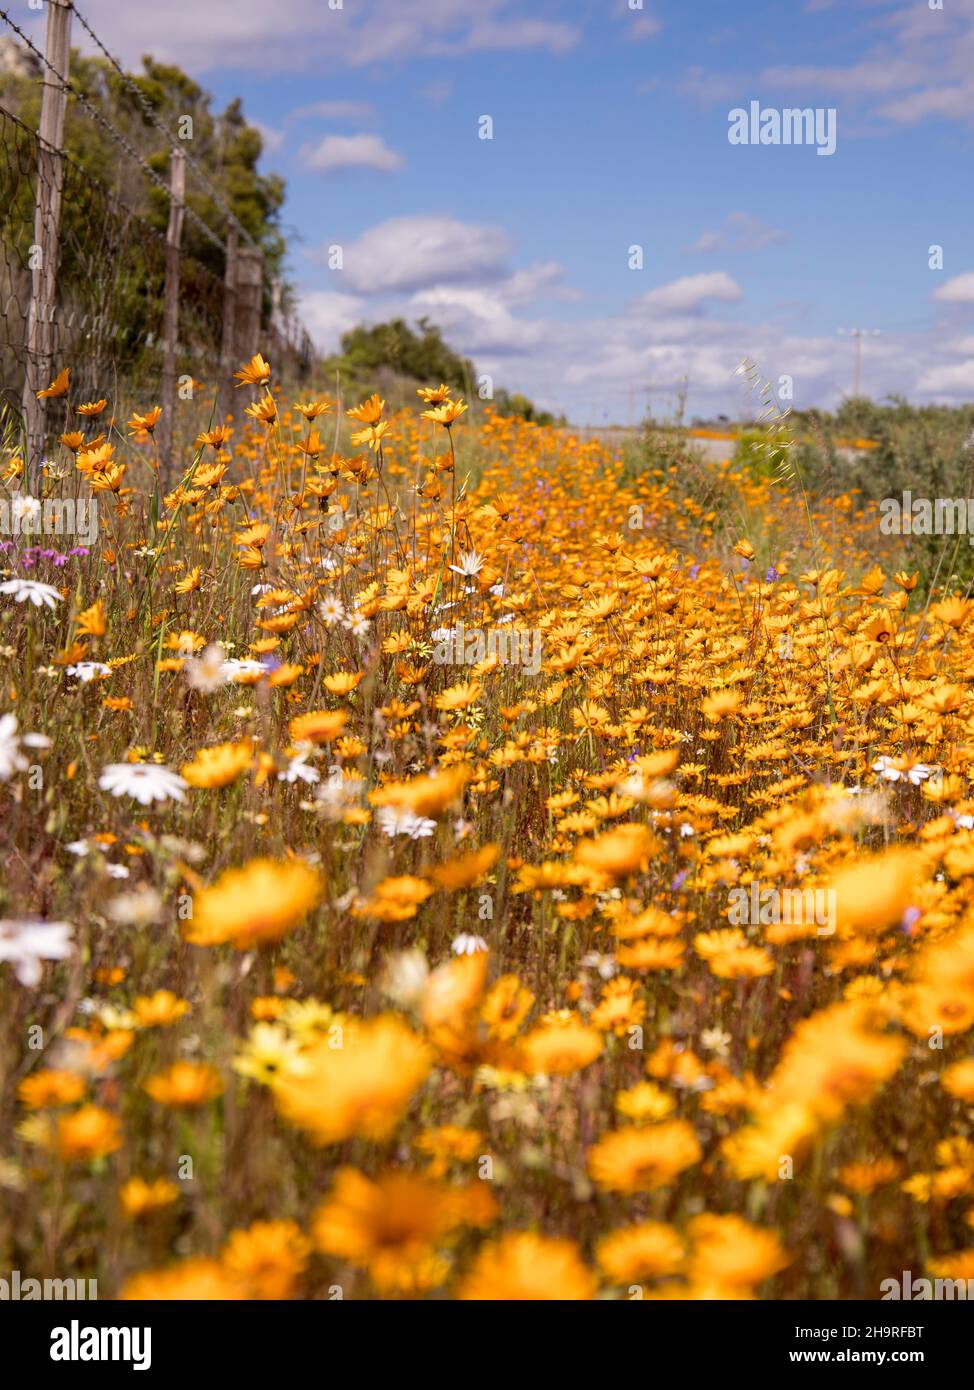 Orange Daisies growing on the side of the road West Coast flower season Stock Photo